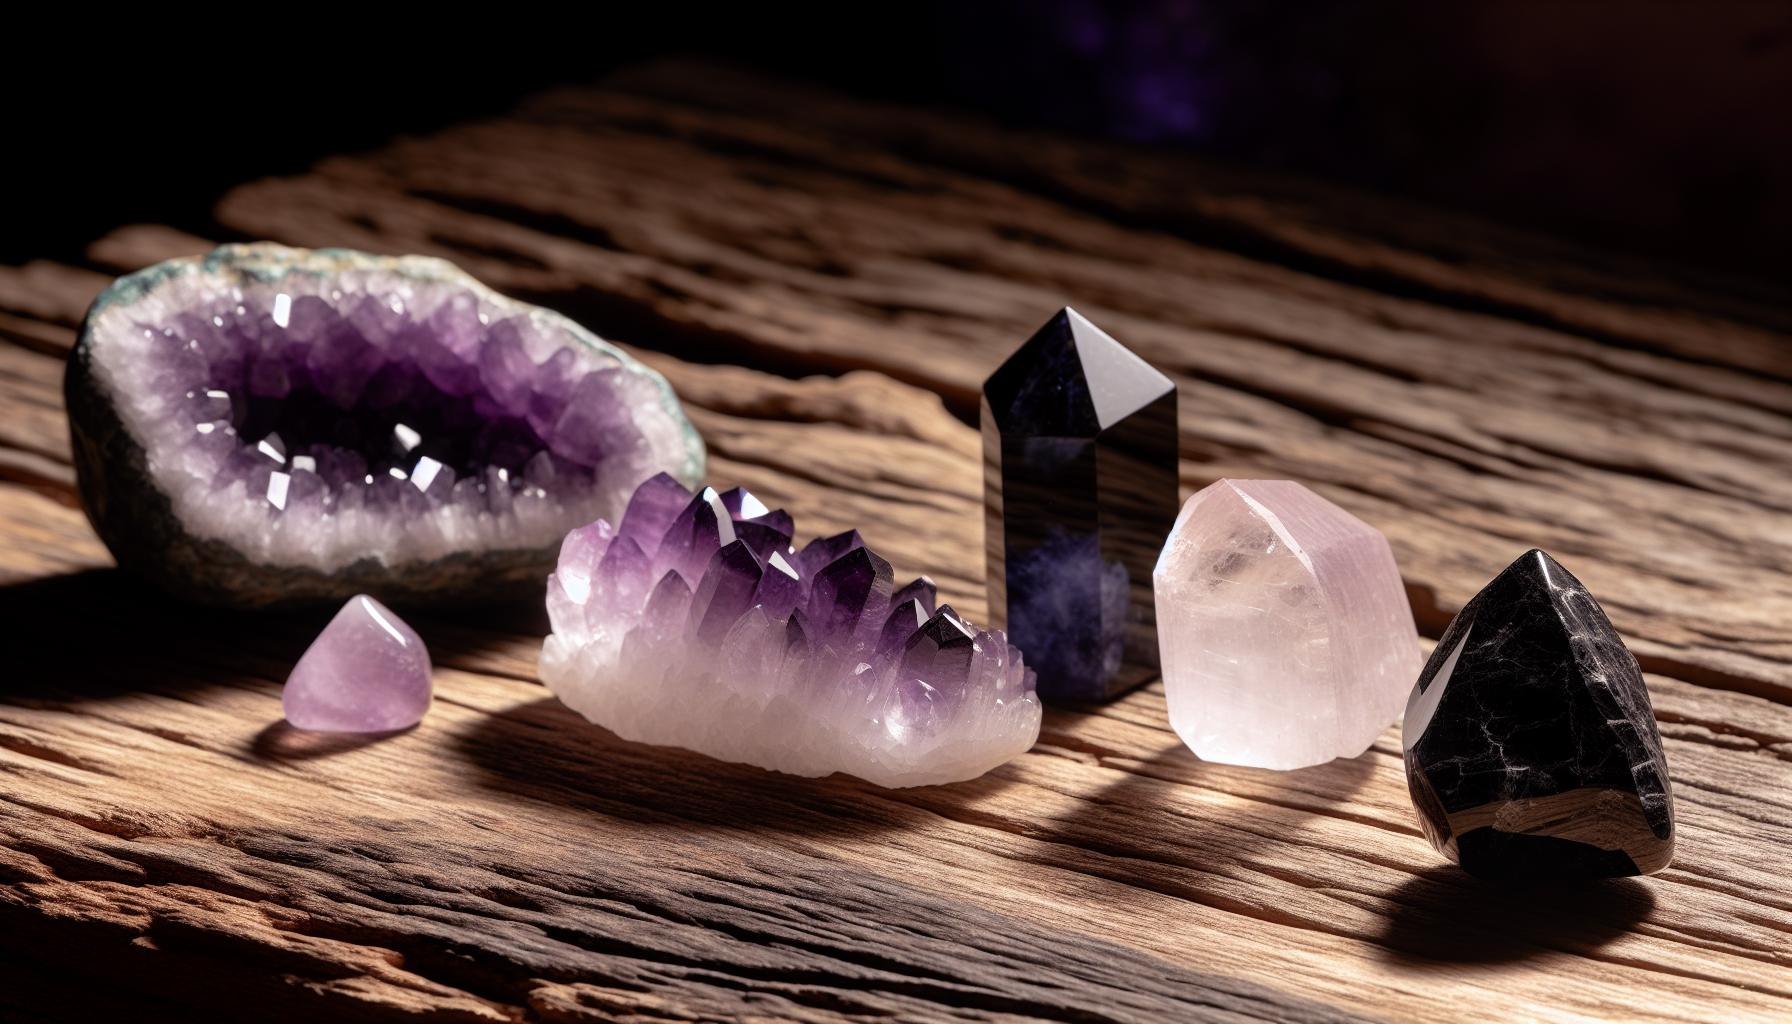 Assortment of different crystals including Amethyst, Clear Quartz, and Black Tourmaline